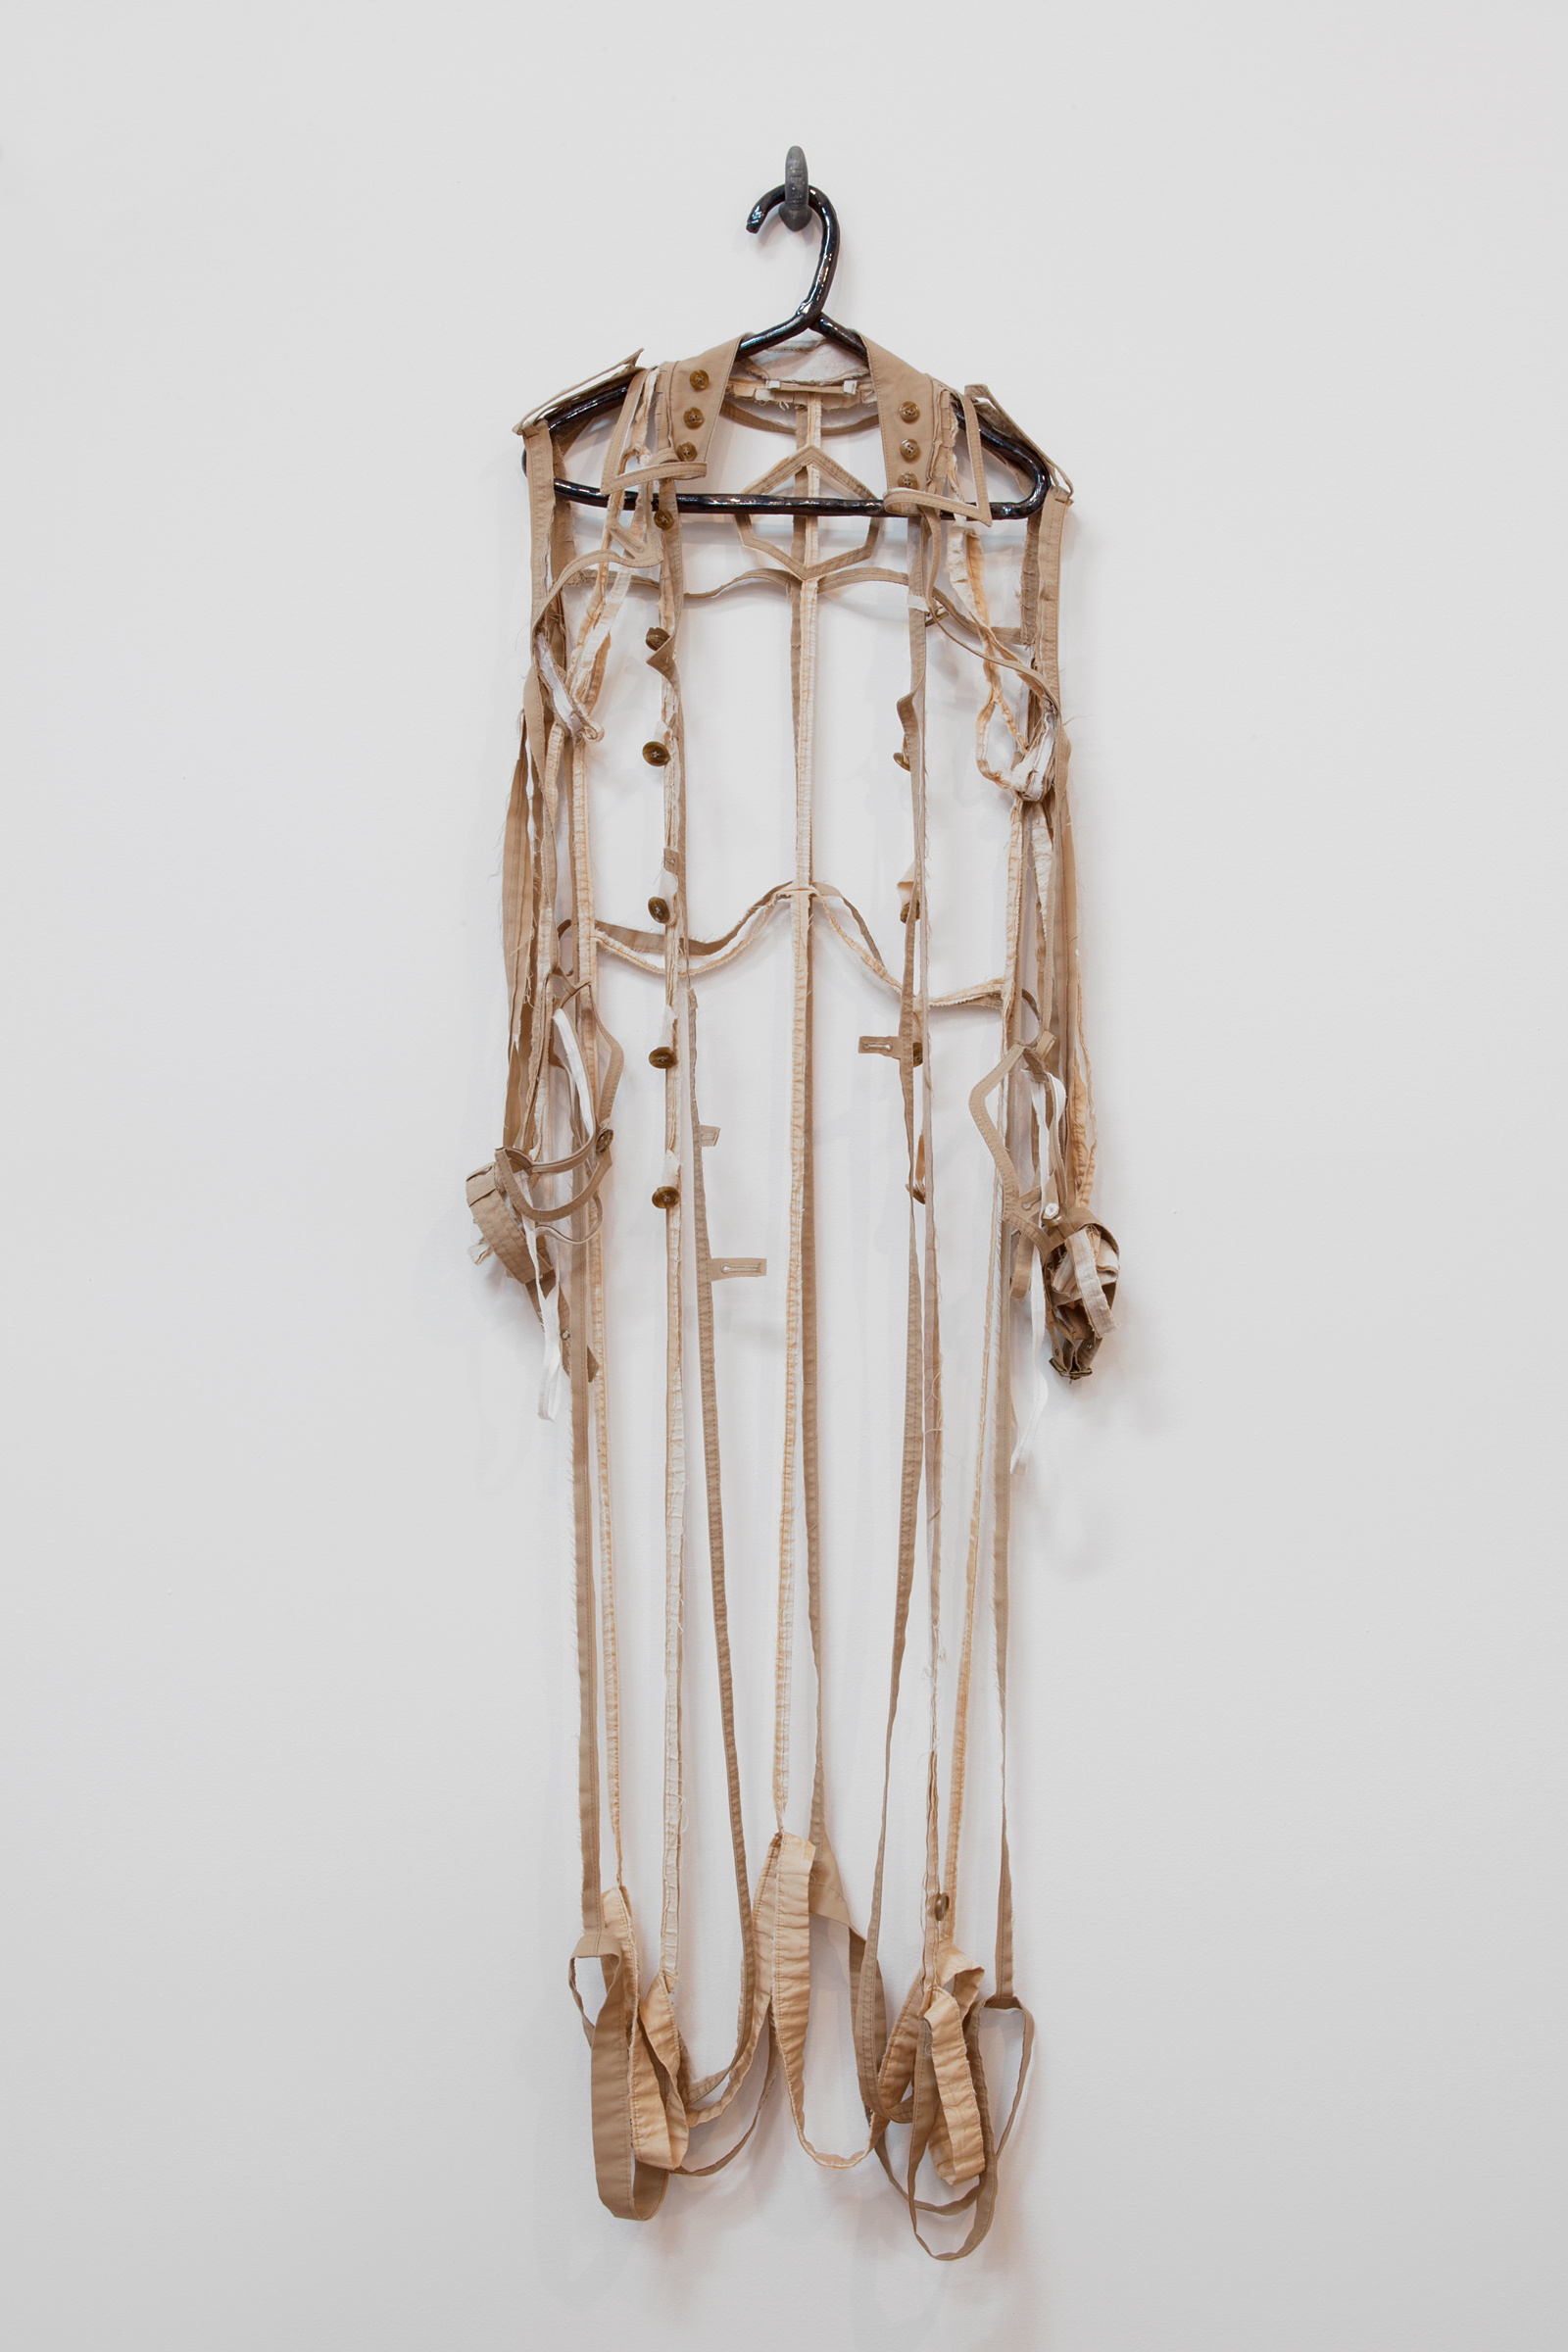   ANNA SEW HOY   beige/tan , fired stoneware, trench coat and resin finger hook, 62.5" x 17" x 4", 2012 